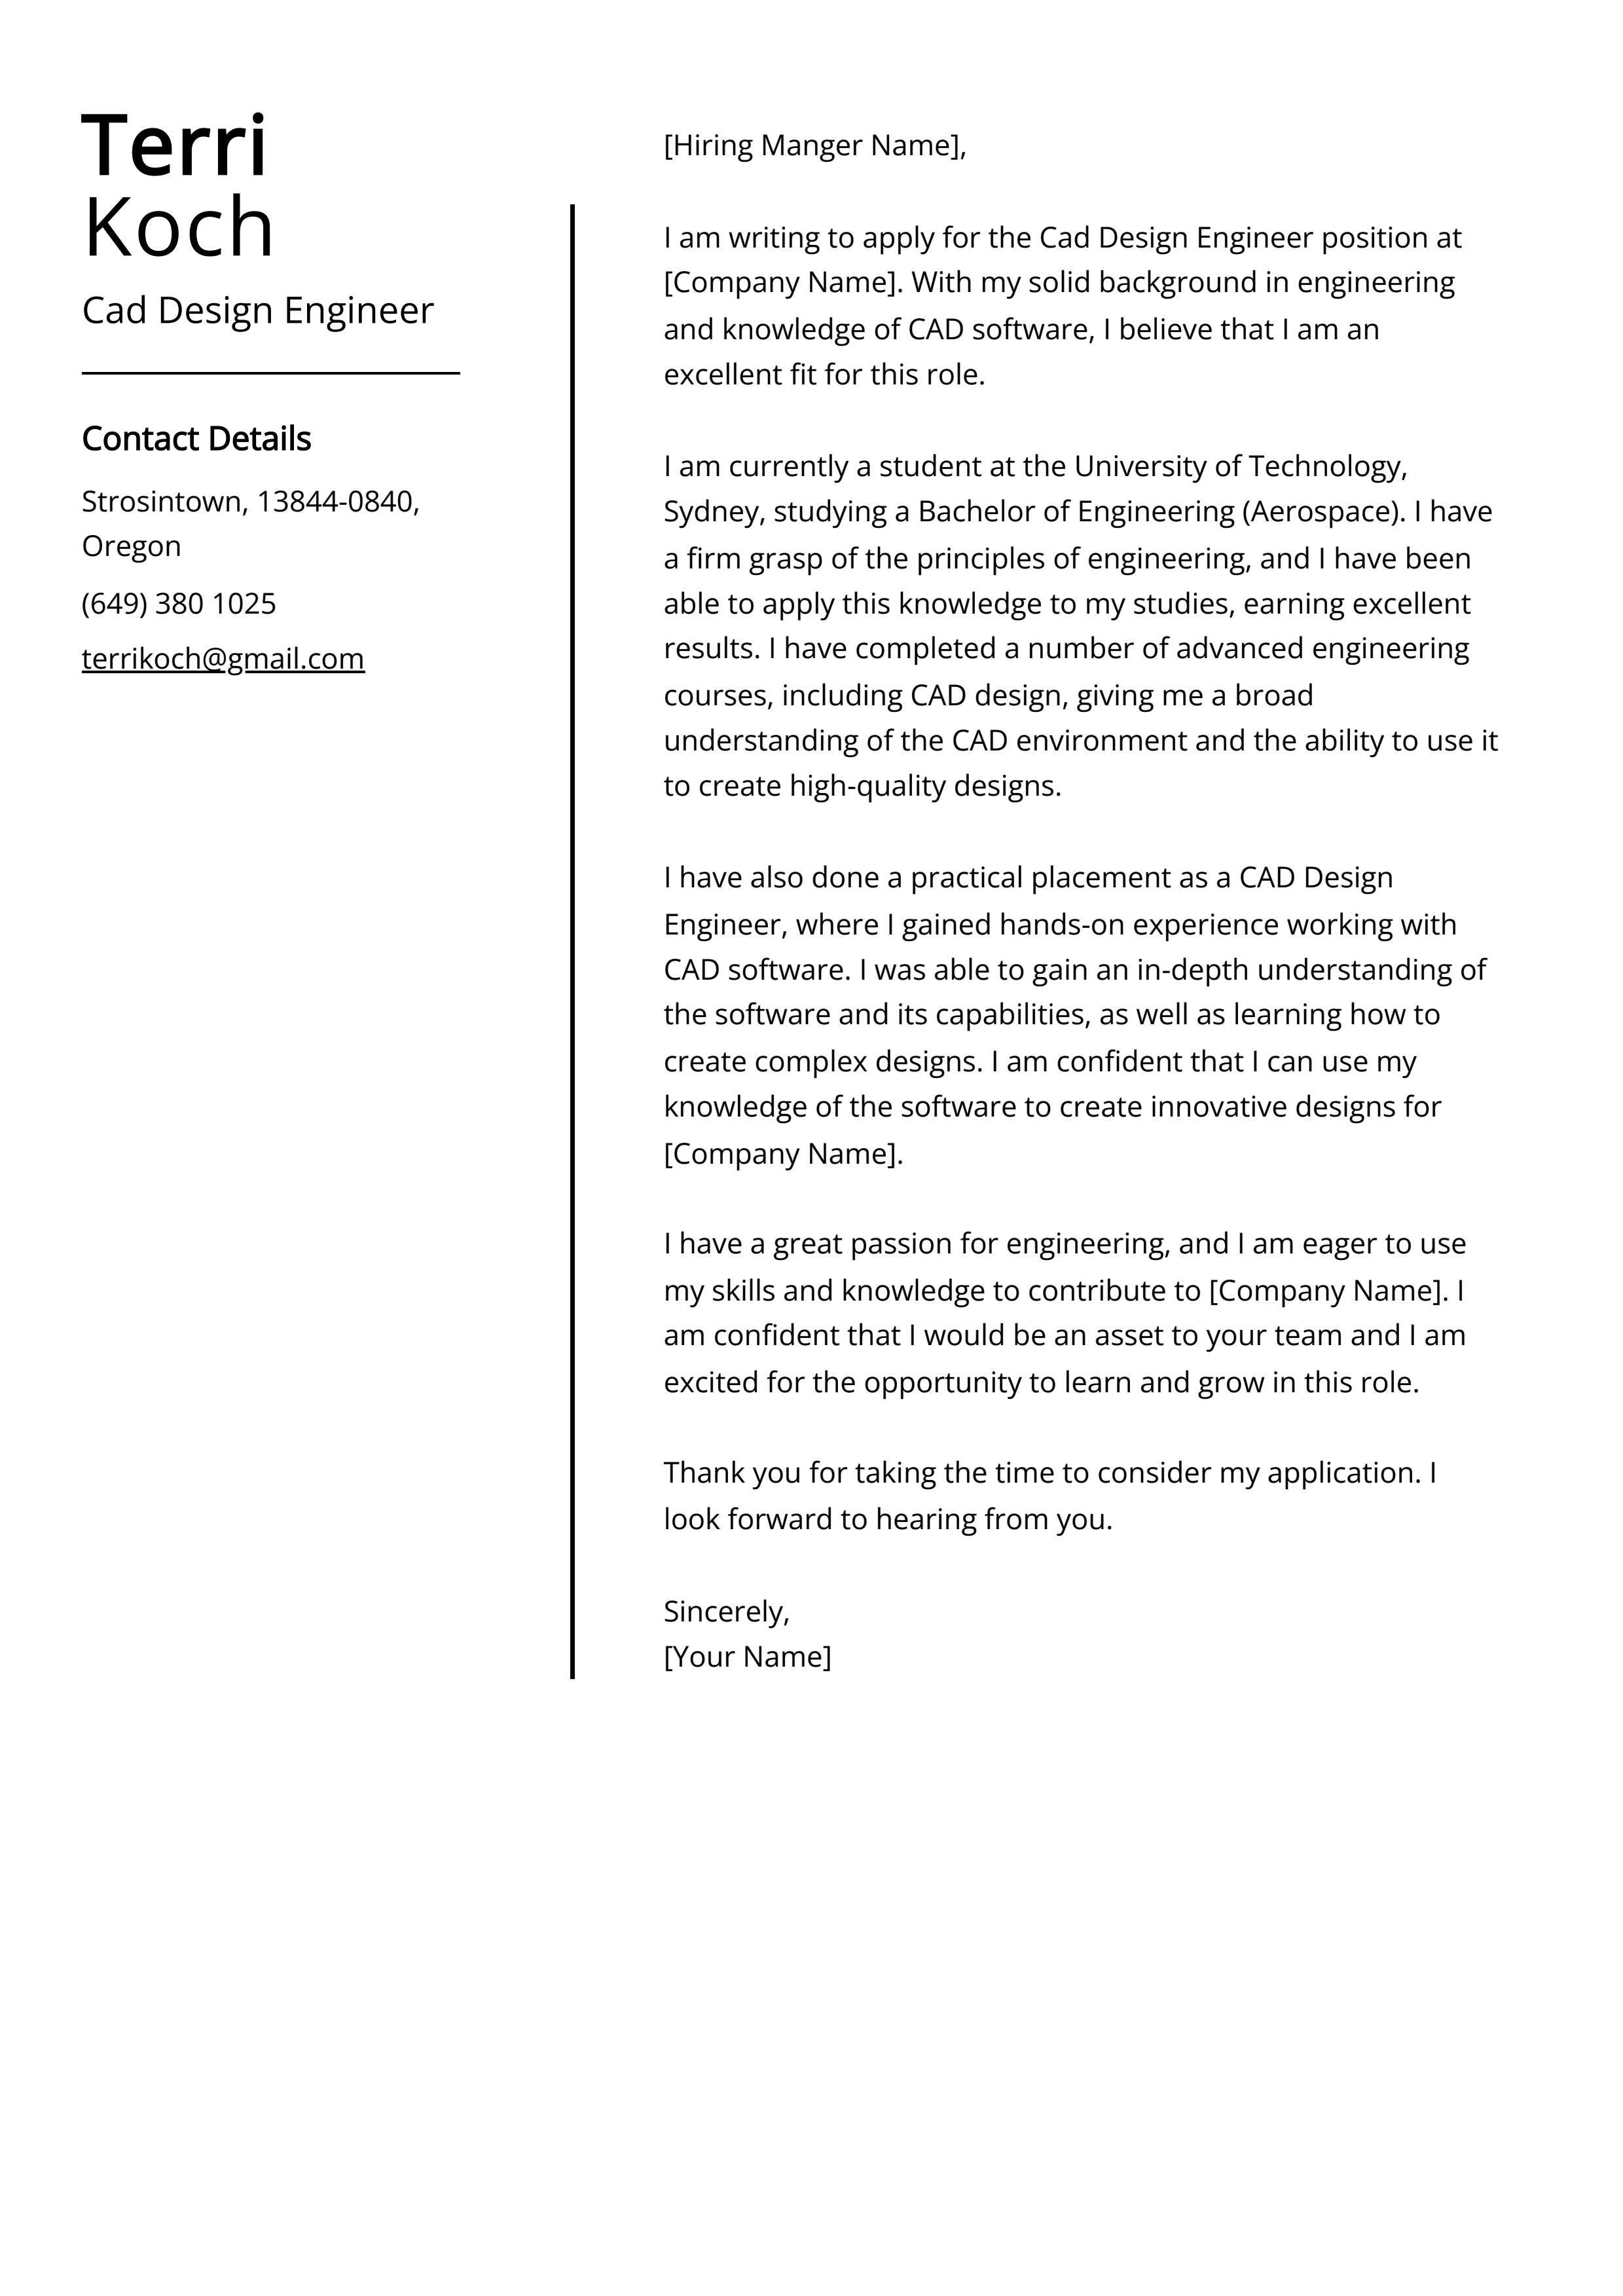 Cad Design Engineer Cover Letter Example